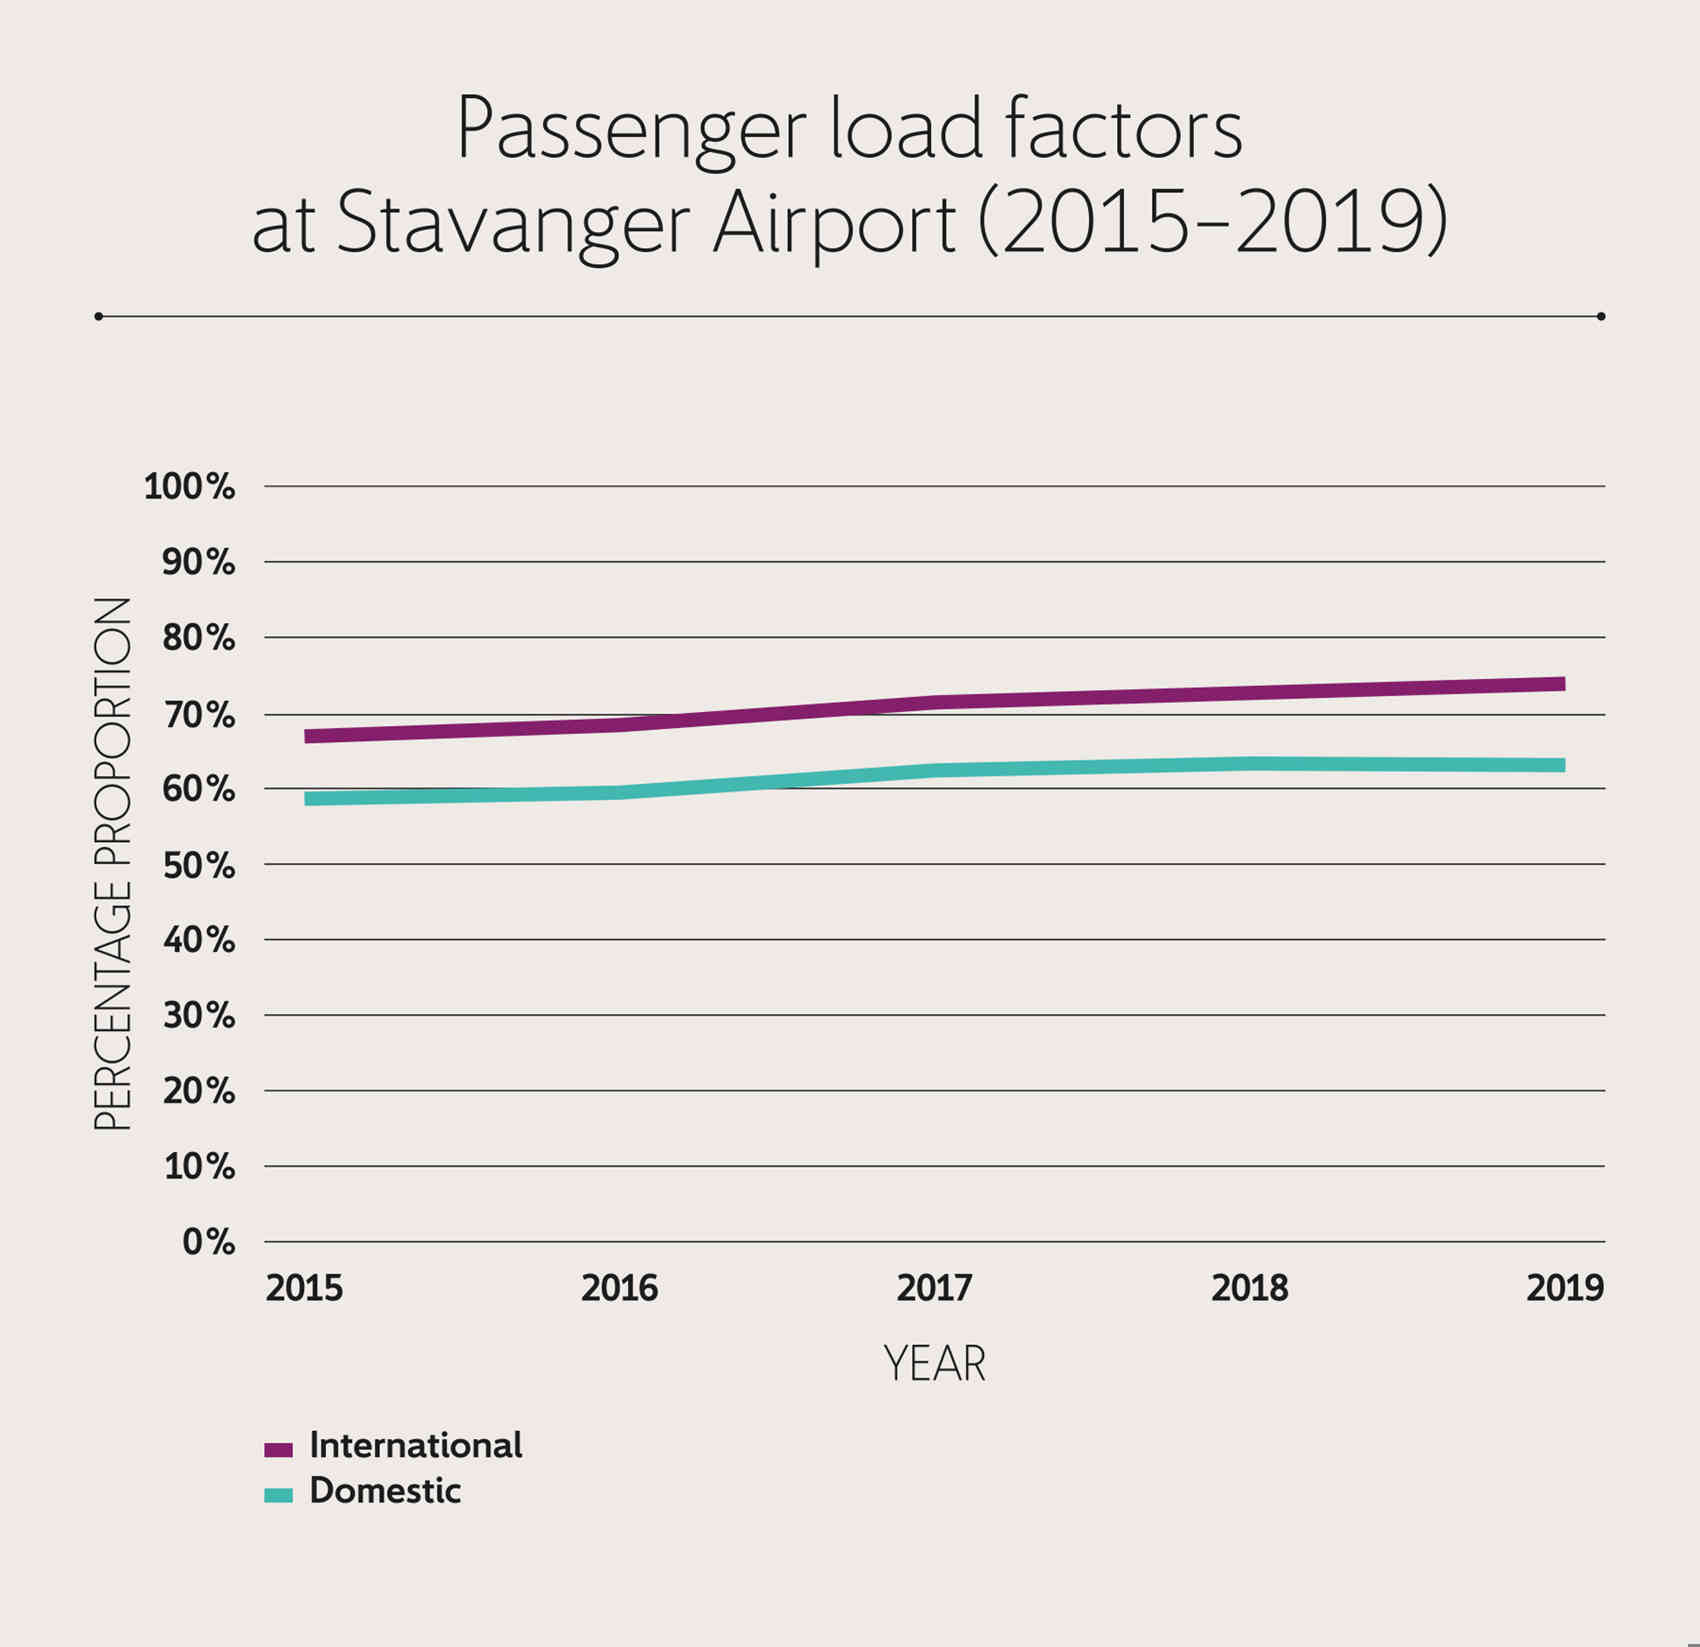 Passenger loads have risen steadily over the last four years both in international and domestic travel.